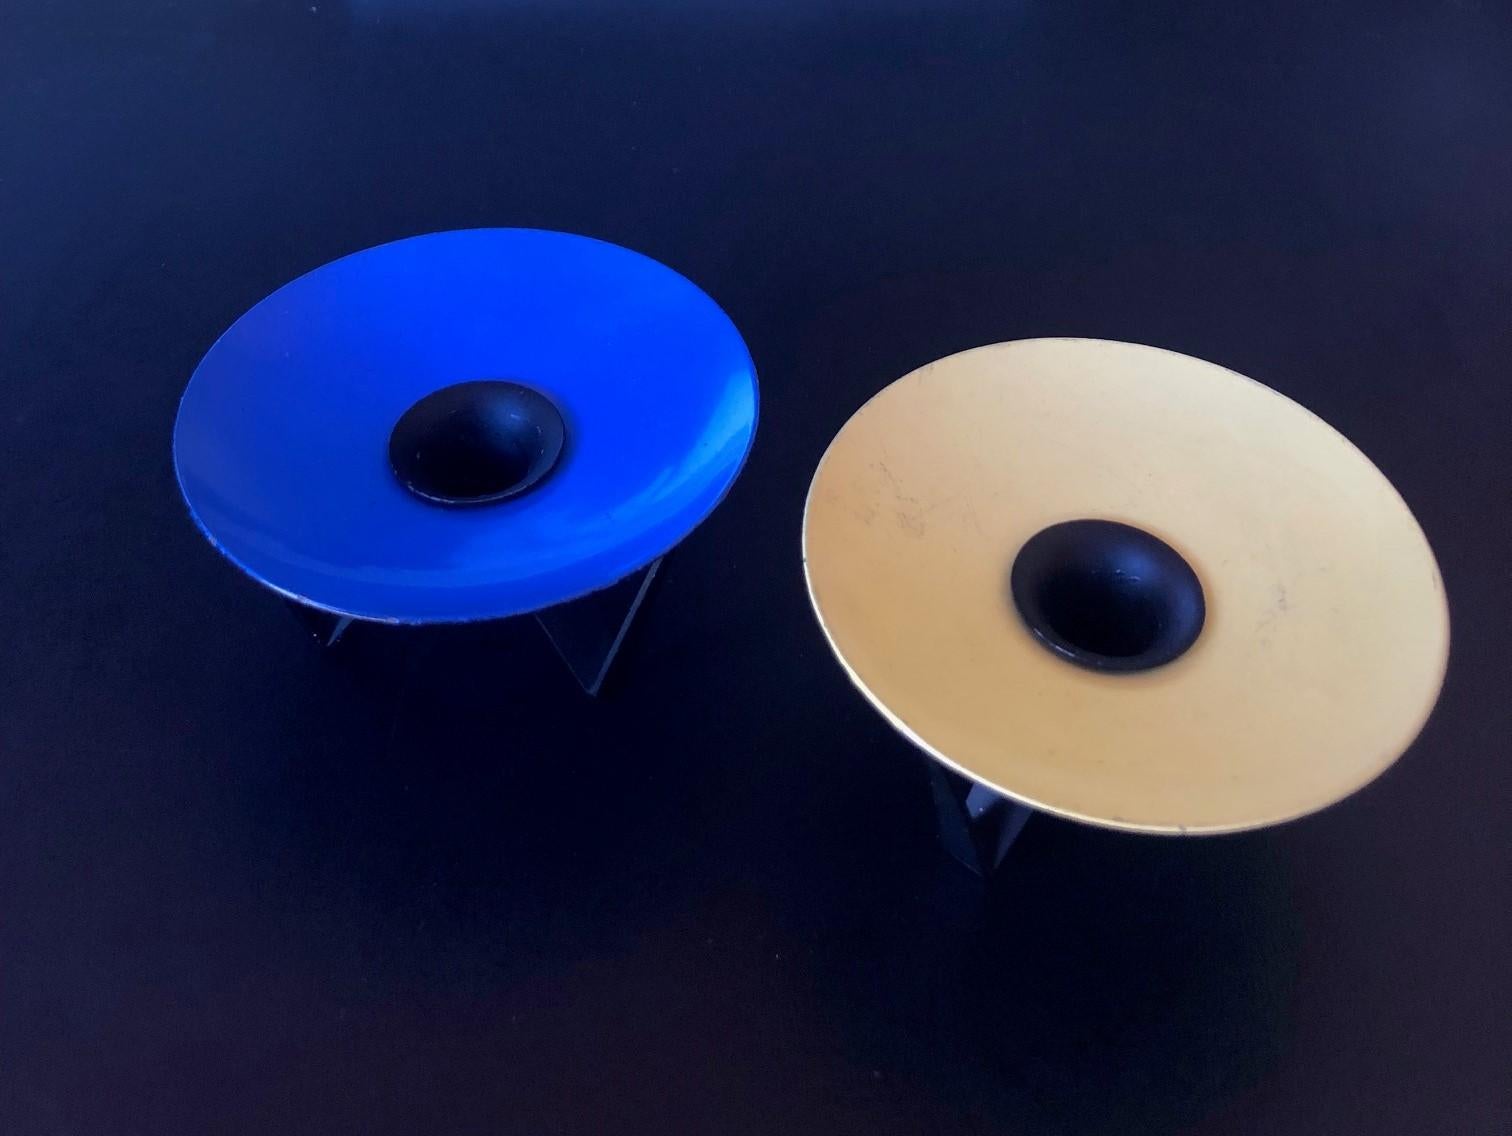 Pair of midcentury candleholders by Laurids Lonborg, circa 1960s. The holders are in good vintage condition with age appropriate wear; they hold a standard 1